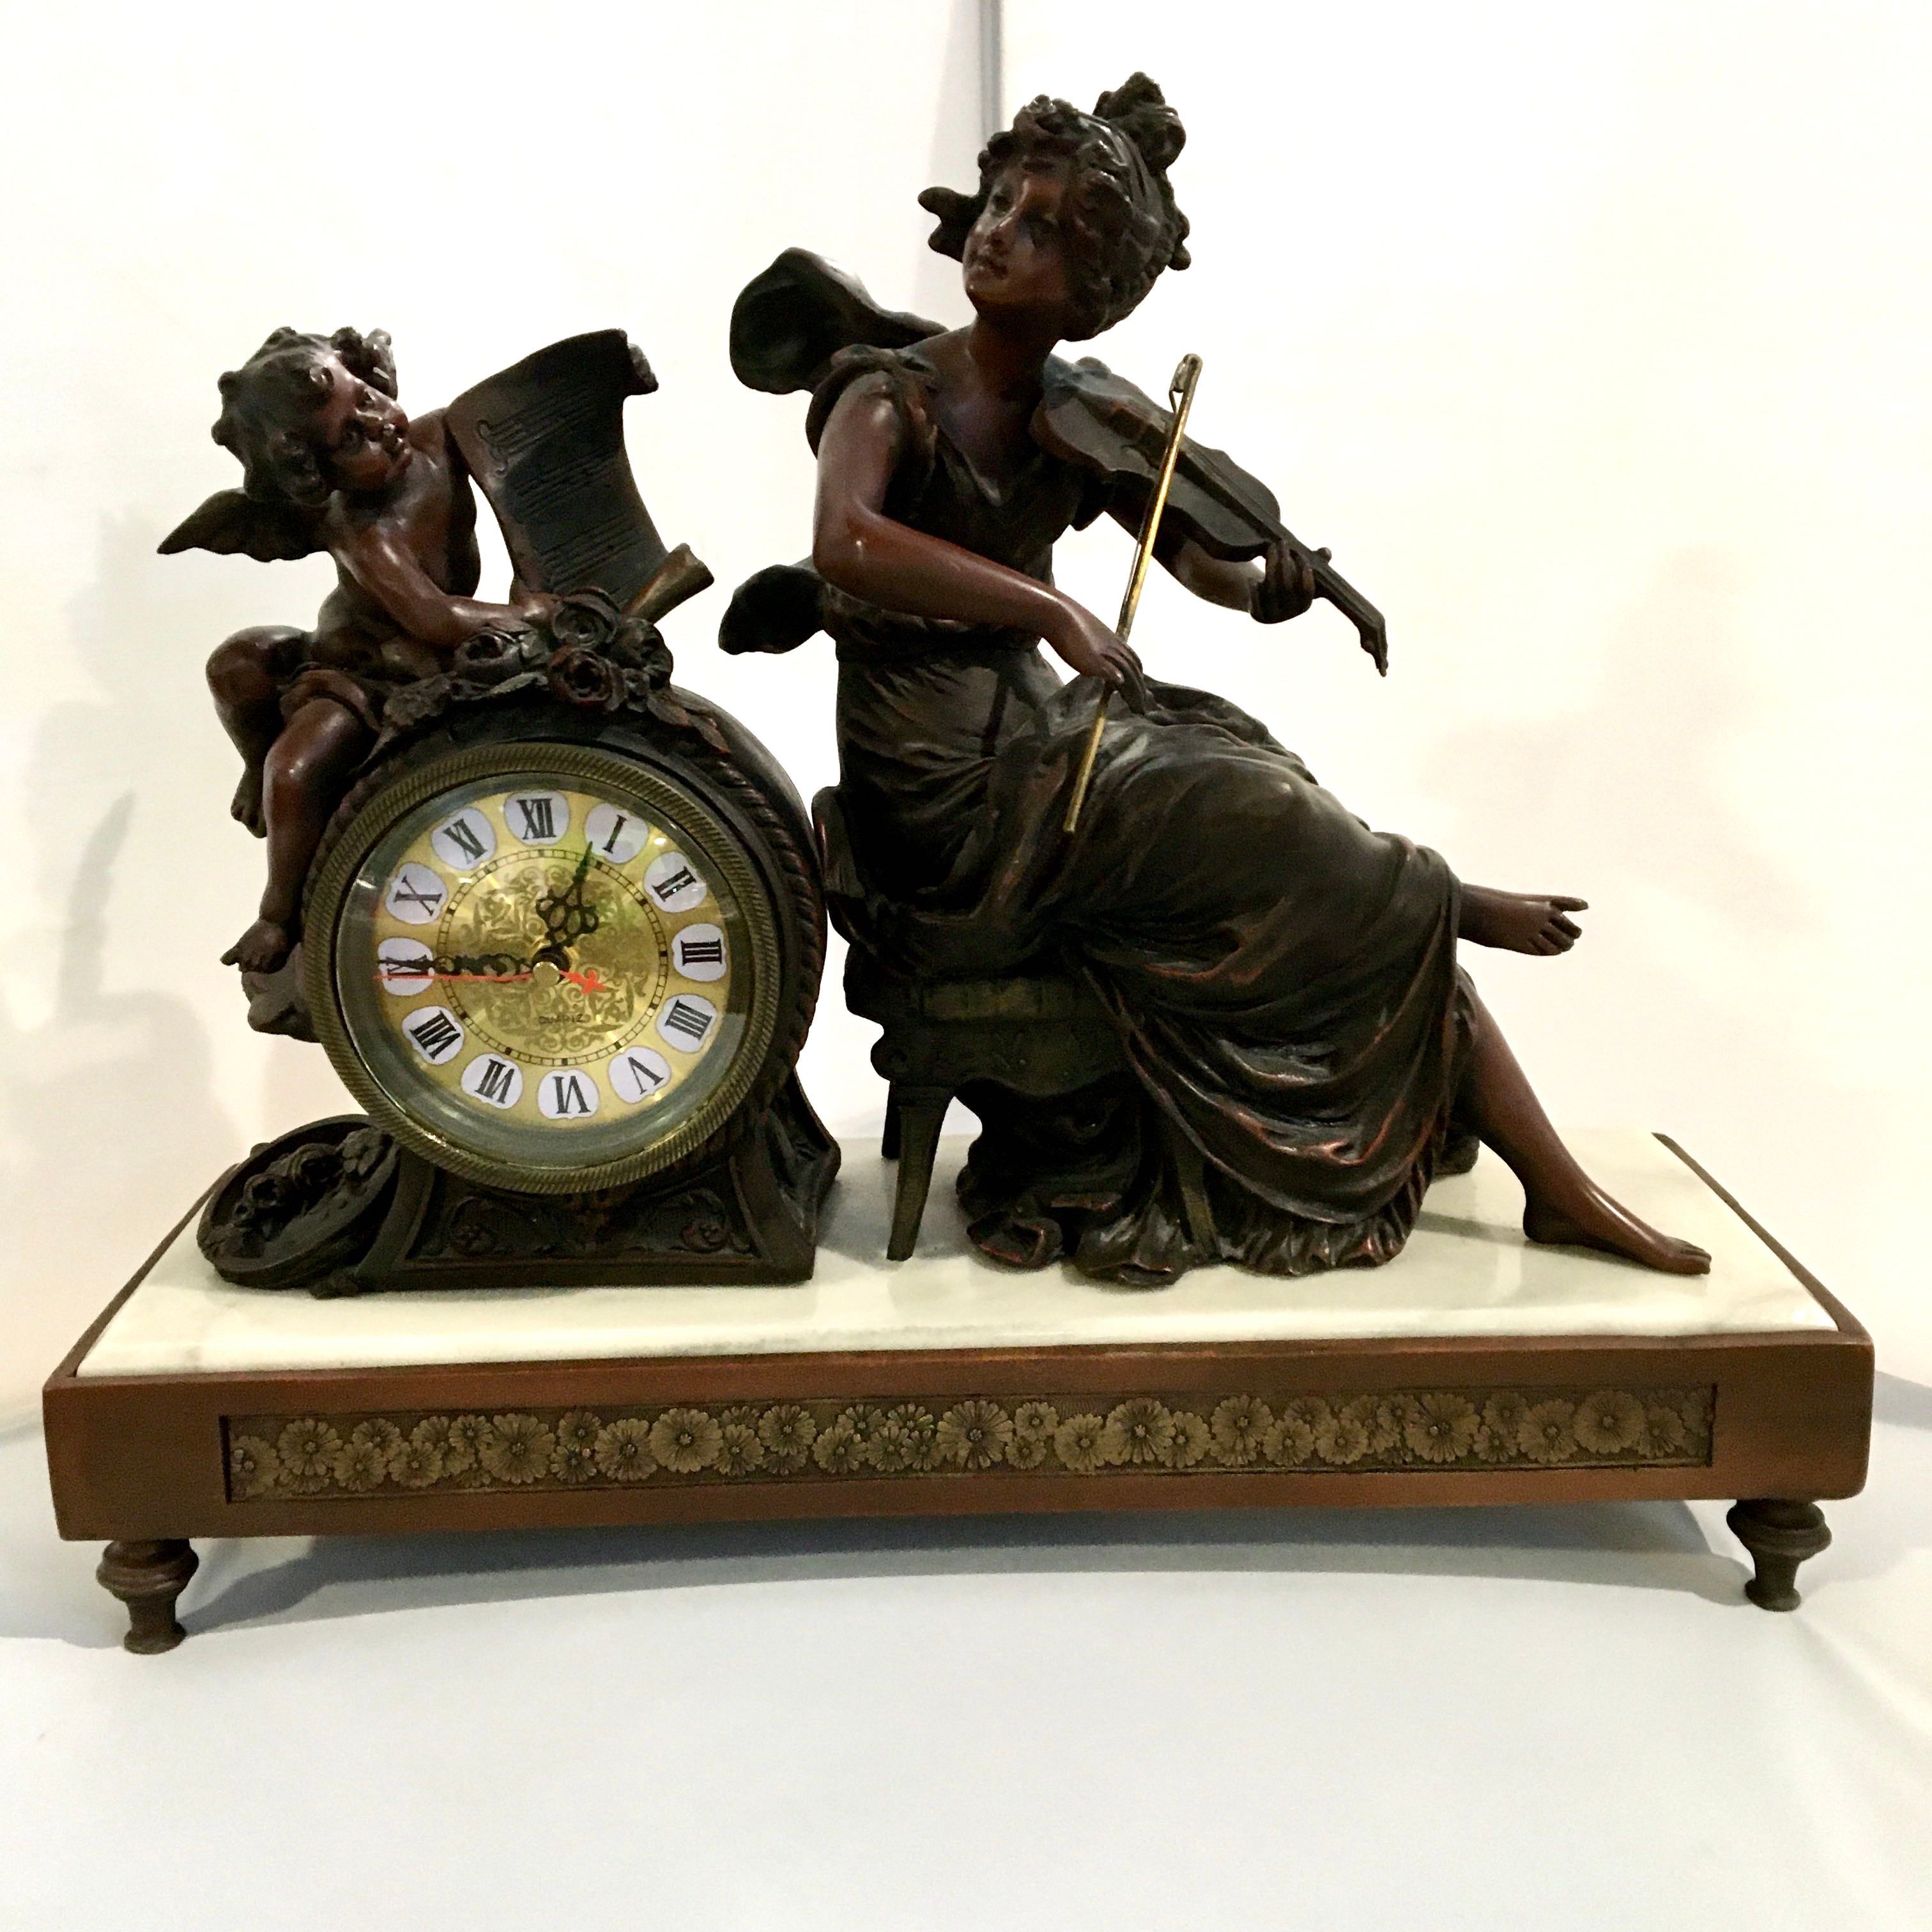 19"x 6.75"x 16" Early 20th Century with Clock Violin Player & Cherub Marble Statues